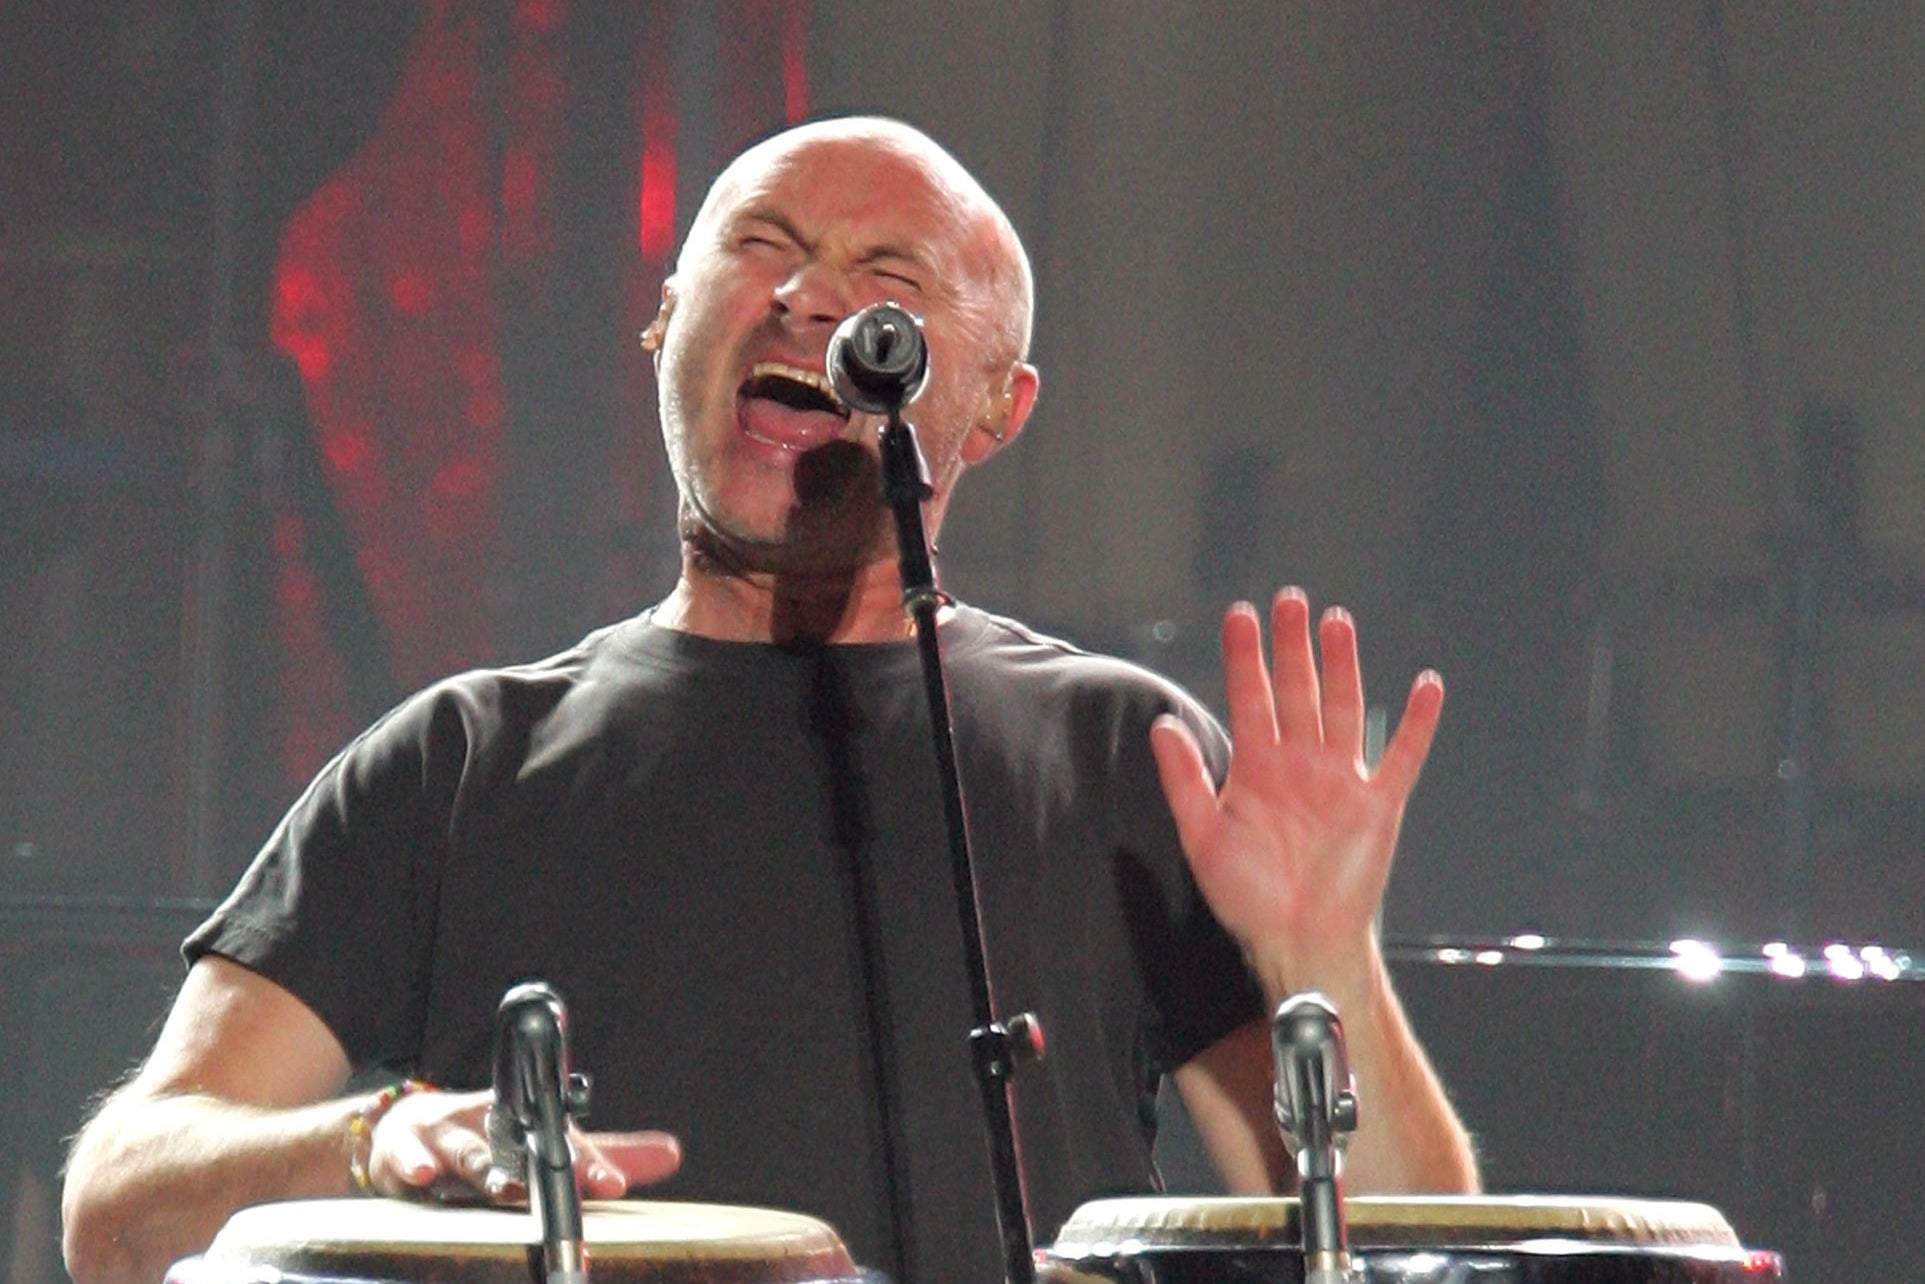 steve hackett says former genesis bandmate phil collins ‘doesn’t deserve what happened to him’